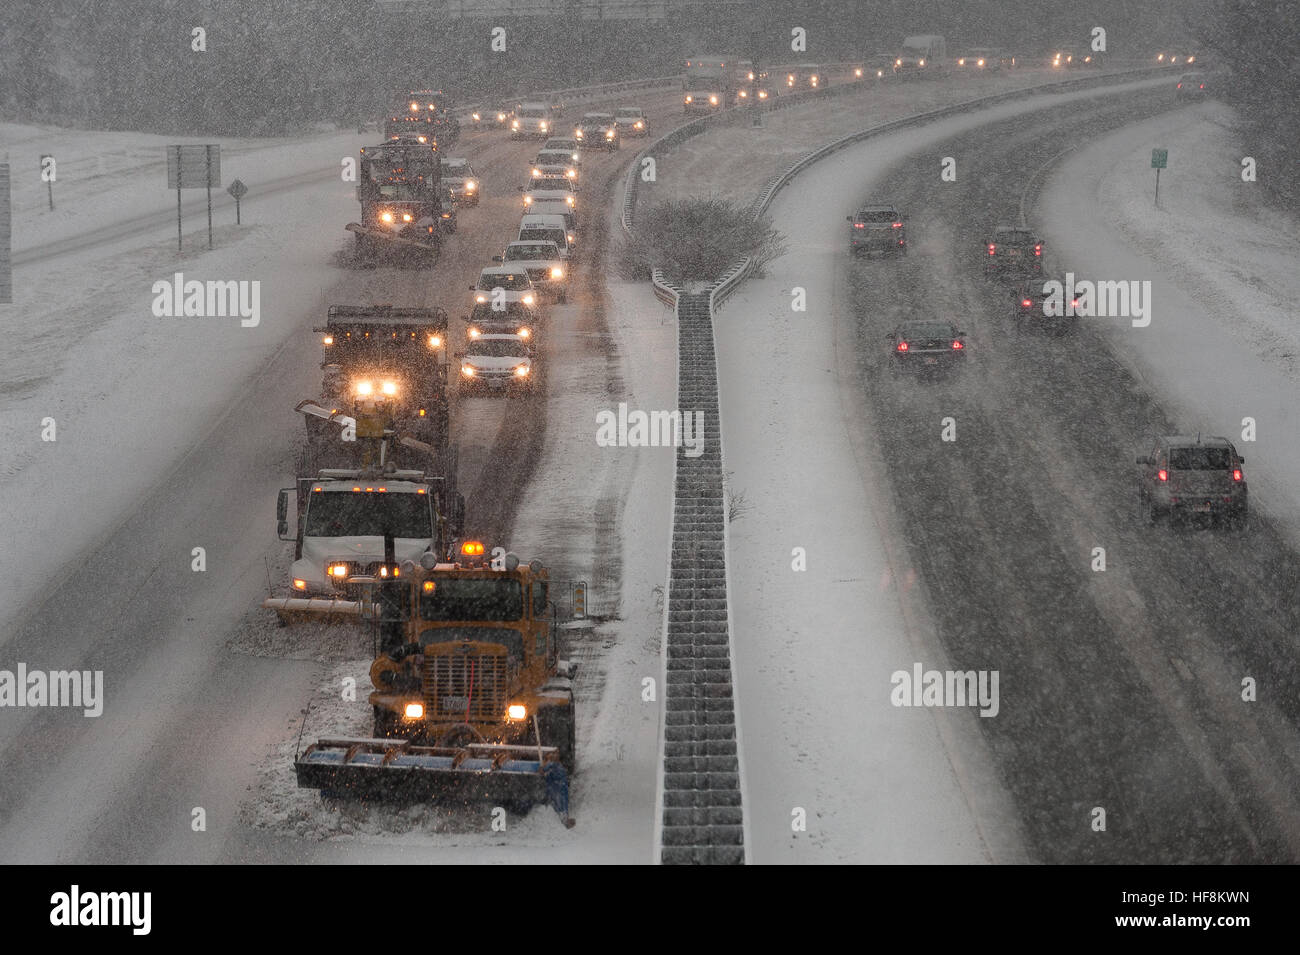 Westminster, Massachusetts, USA. 29 December, 2016. A battery of snowplows, sometimes referred to as a 'conga line' back up traffic behind them as they clear Rt 2 in Westminster, Mass. A winter storm projected to bring about a foot of snow to north central Massachusetts impacted the roads and the subsequent afternoon commute with many crashes reported throughout the region. Oncoming traffic is headed eastbound.   © Jim Marabello/ Alamy Live News Stock Photo